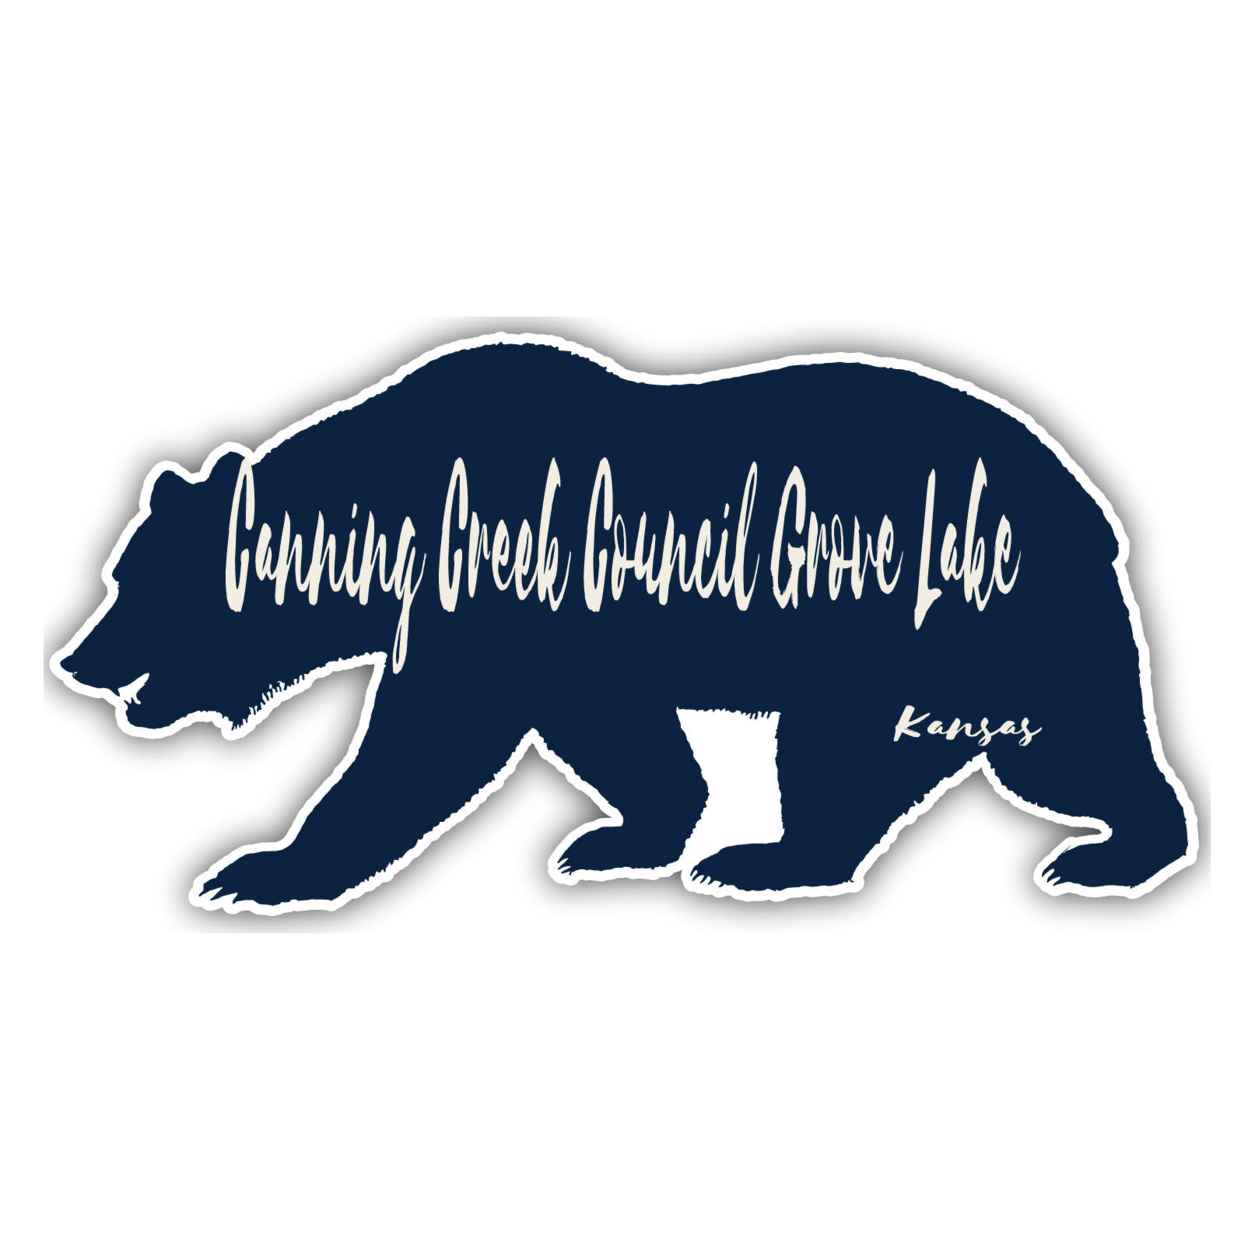 Canning Creek Council Grove Lake Kansas Souvenir Decorative Stickers (Choose Theme And Size) - 4-Pack, 12-Inch, Bear